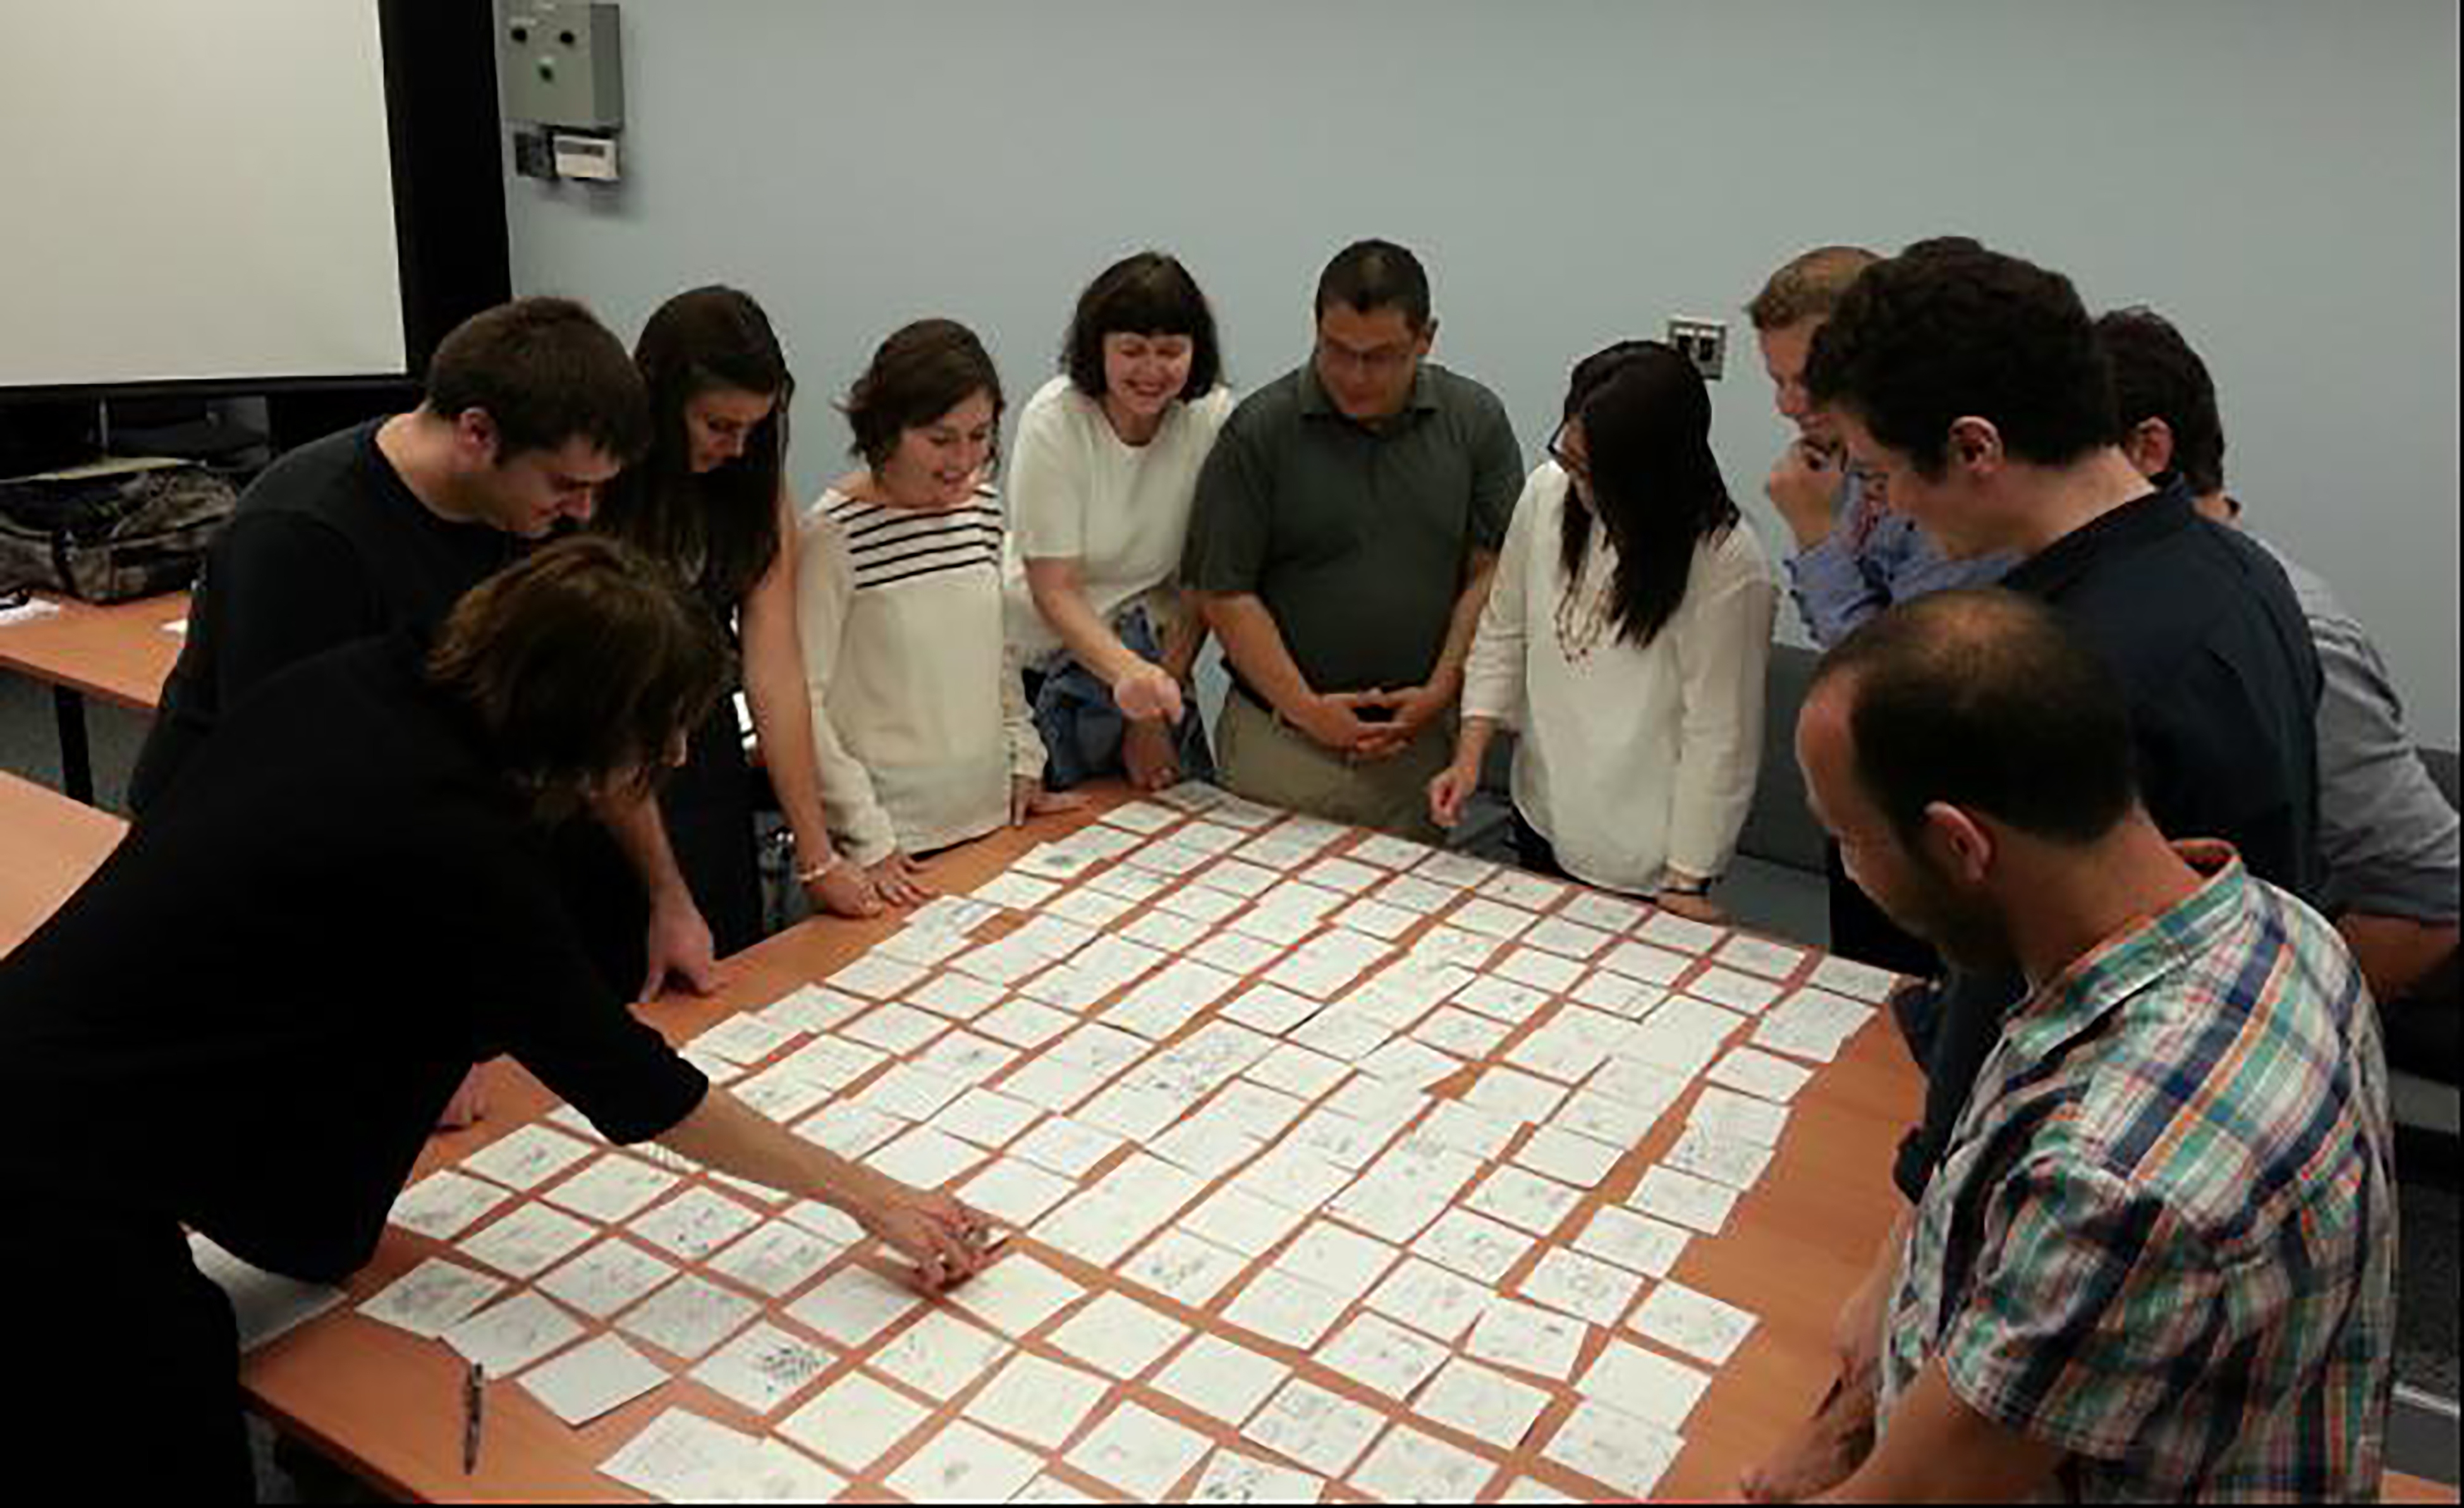 Doctoral students at the Faculty of Information, University of Toronto examine for the first time their drawings of information collected through the iSquare protocol version of the draw-and-write technique.